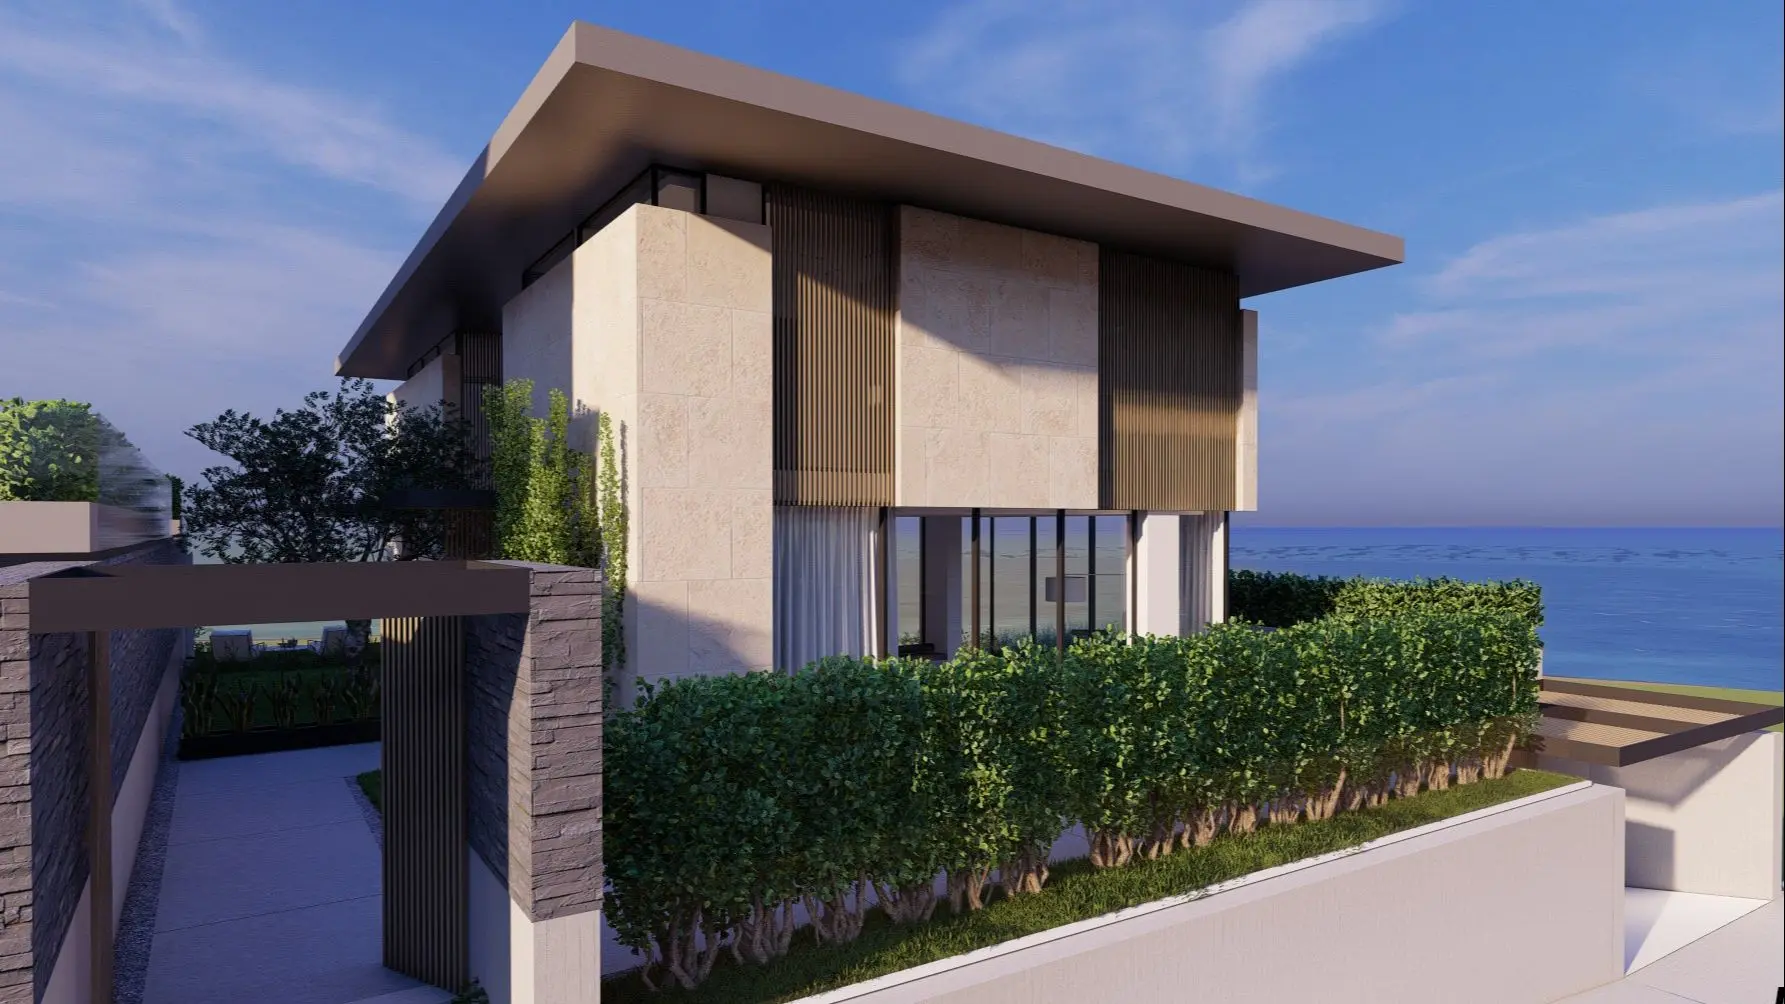 VILLA PROJECT WITH EXCELLENT VIEW IN KARGICAK